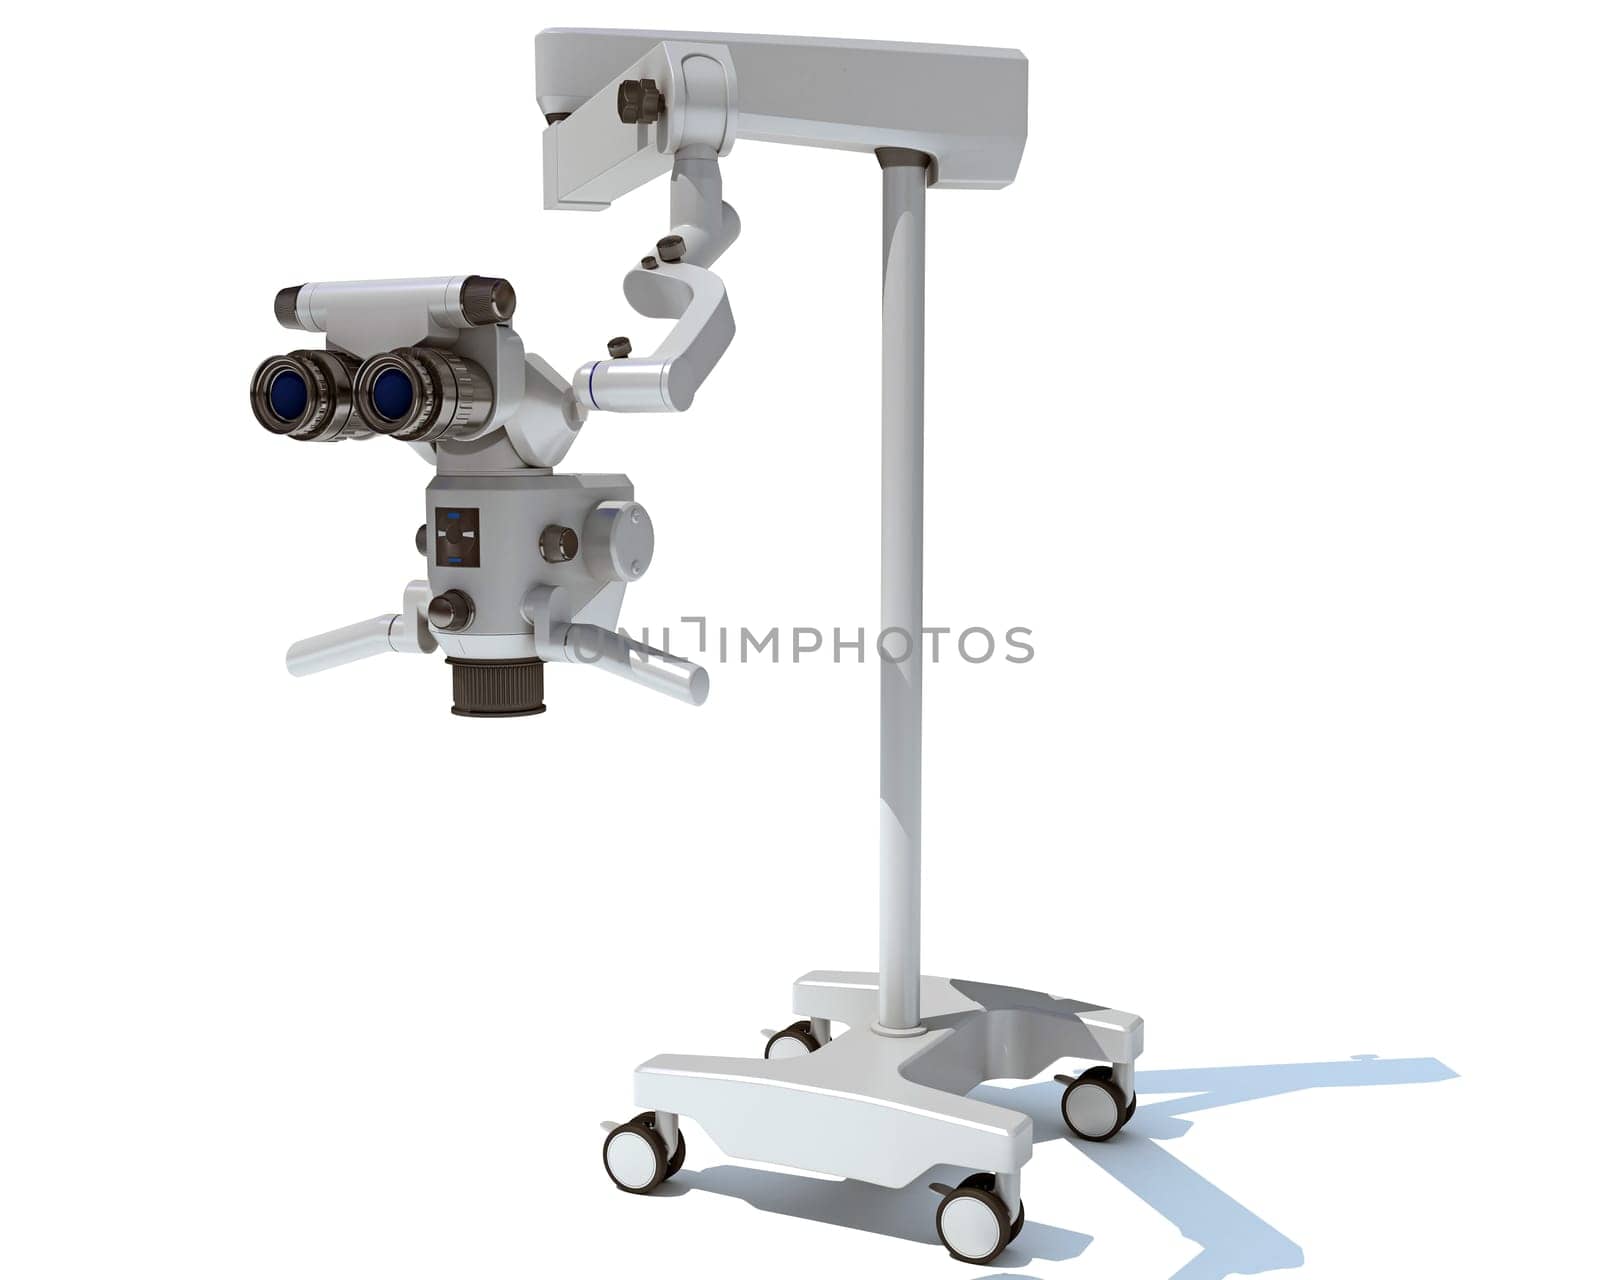 Dental Microscope medical equipment 3D rendering on white background by 3DHorse